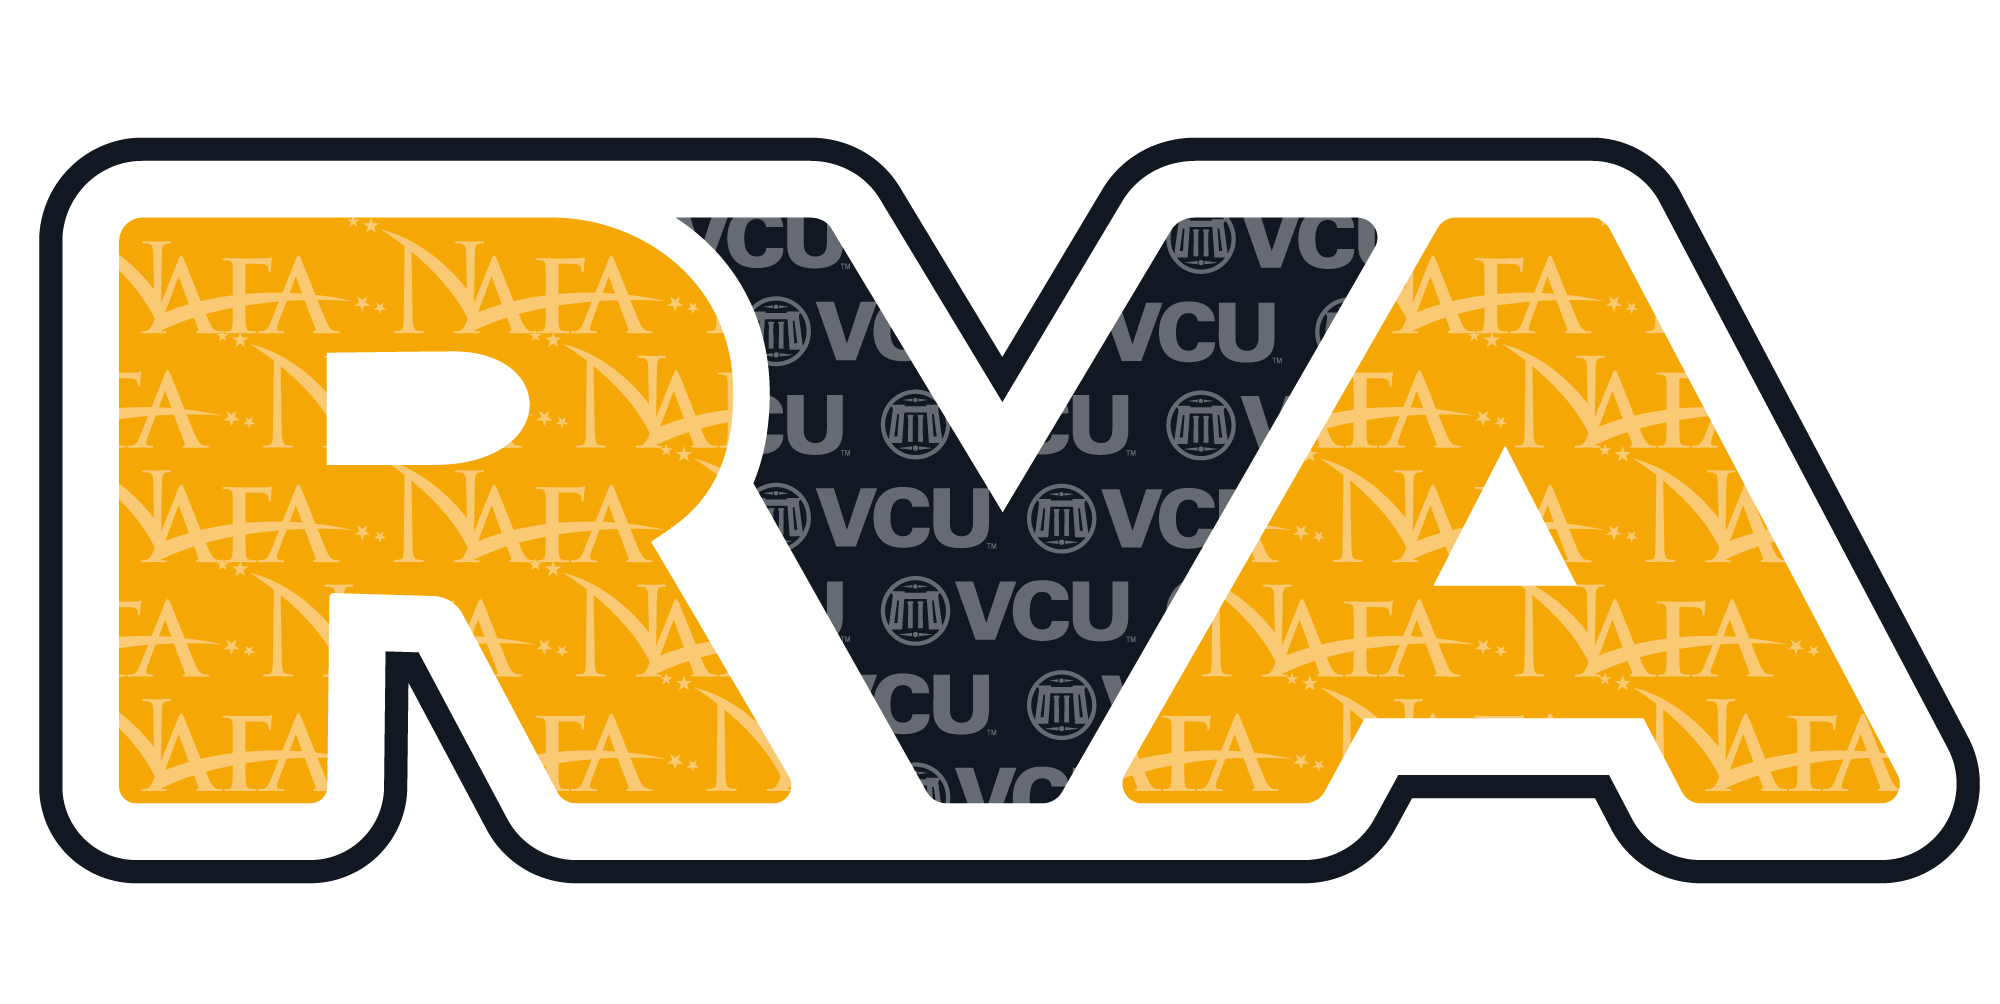 RVA in bubble letters with NAFA and VCU pattern throughout letters